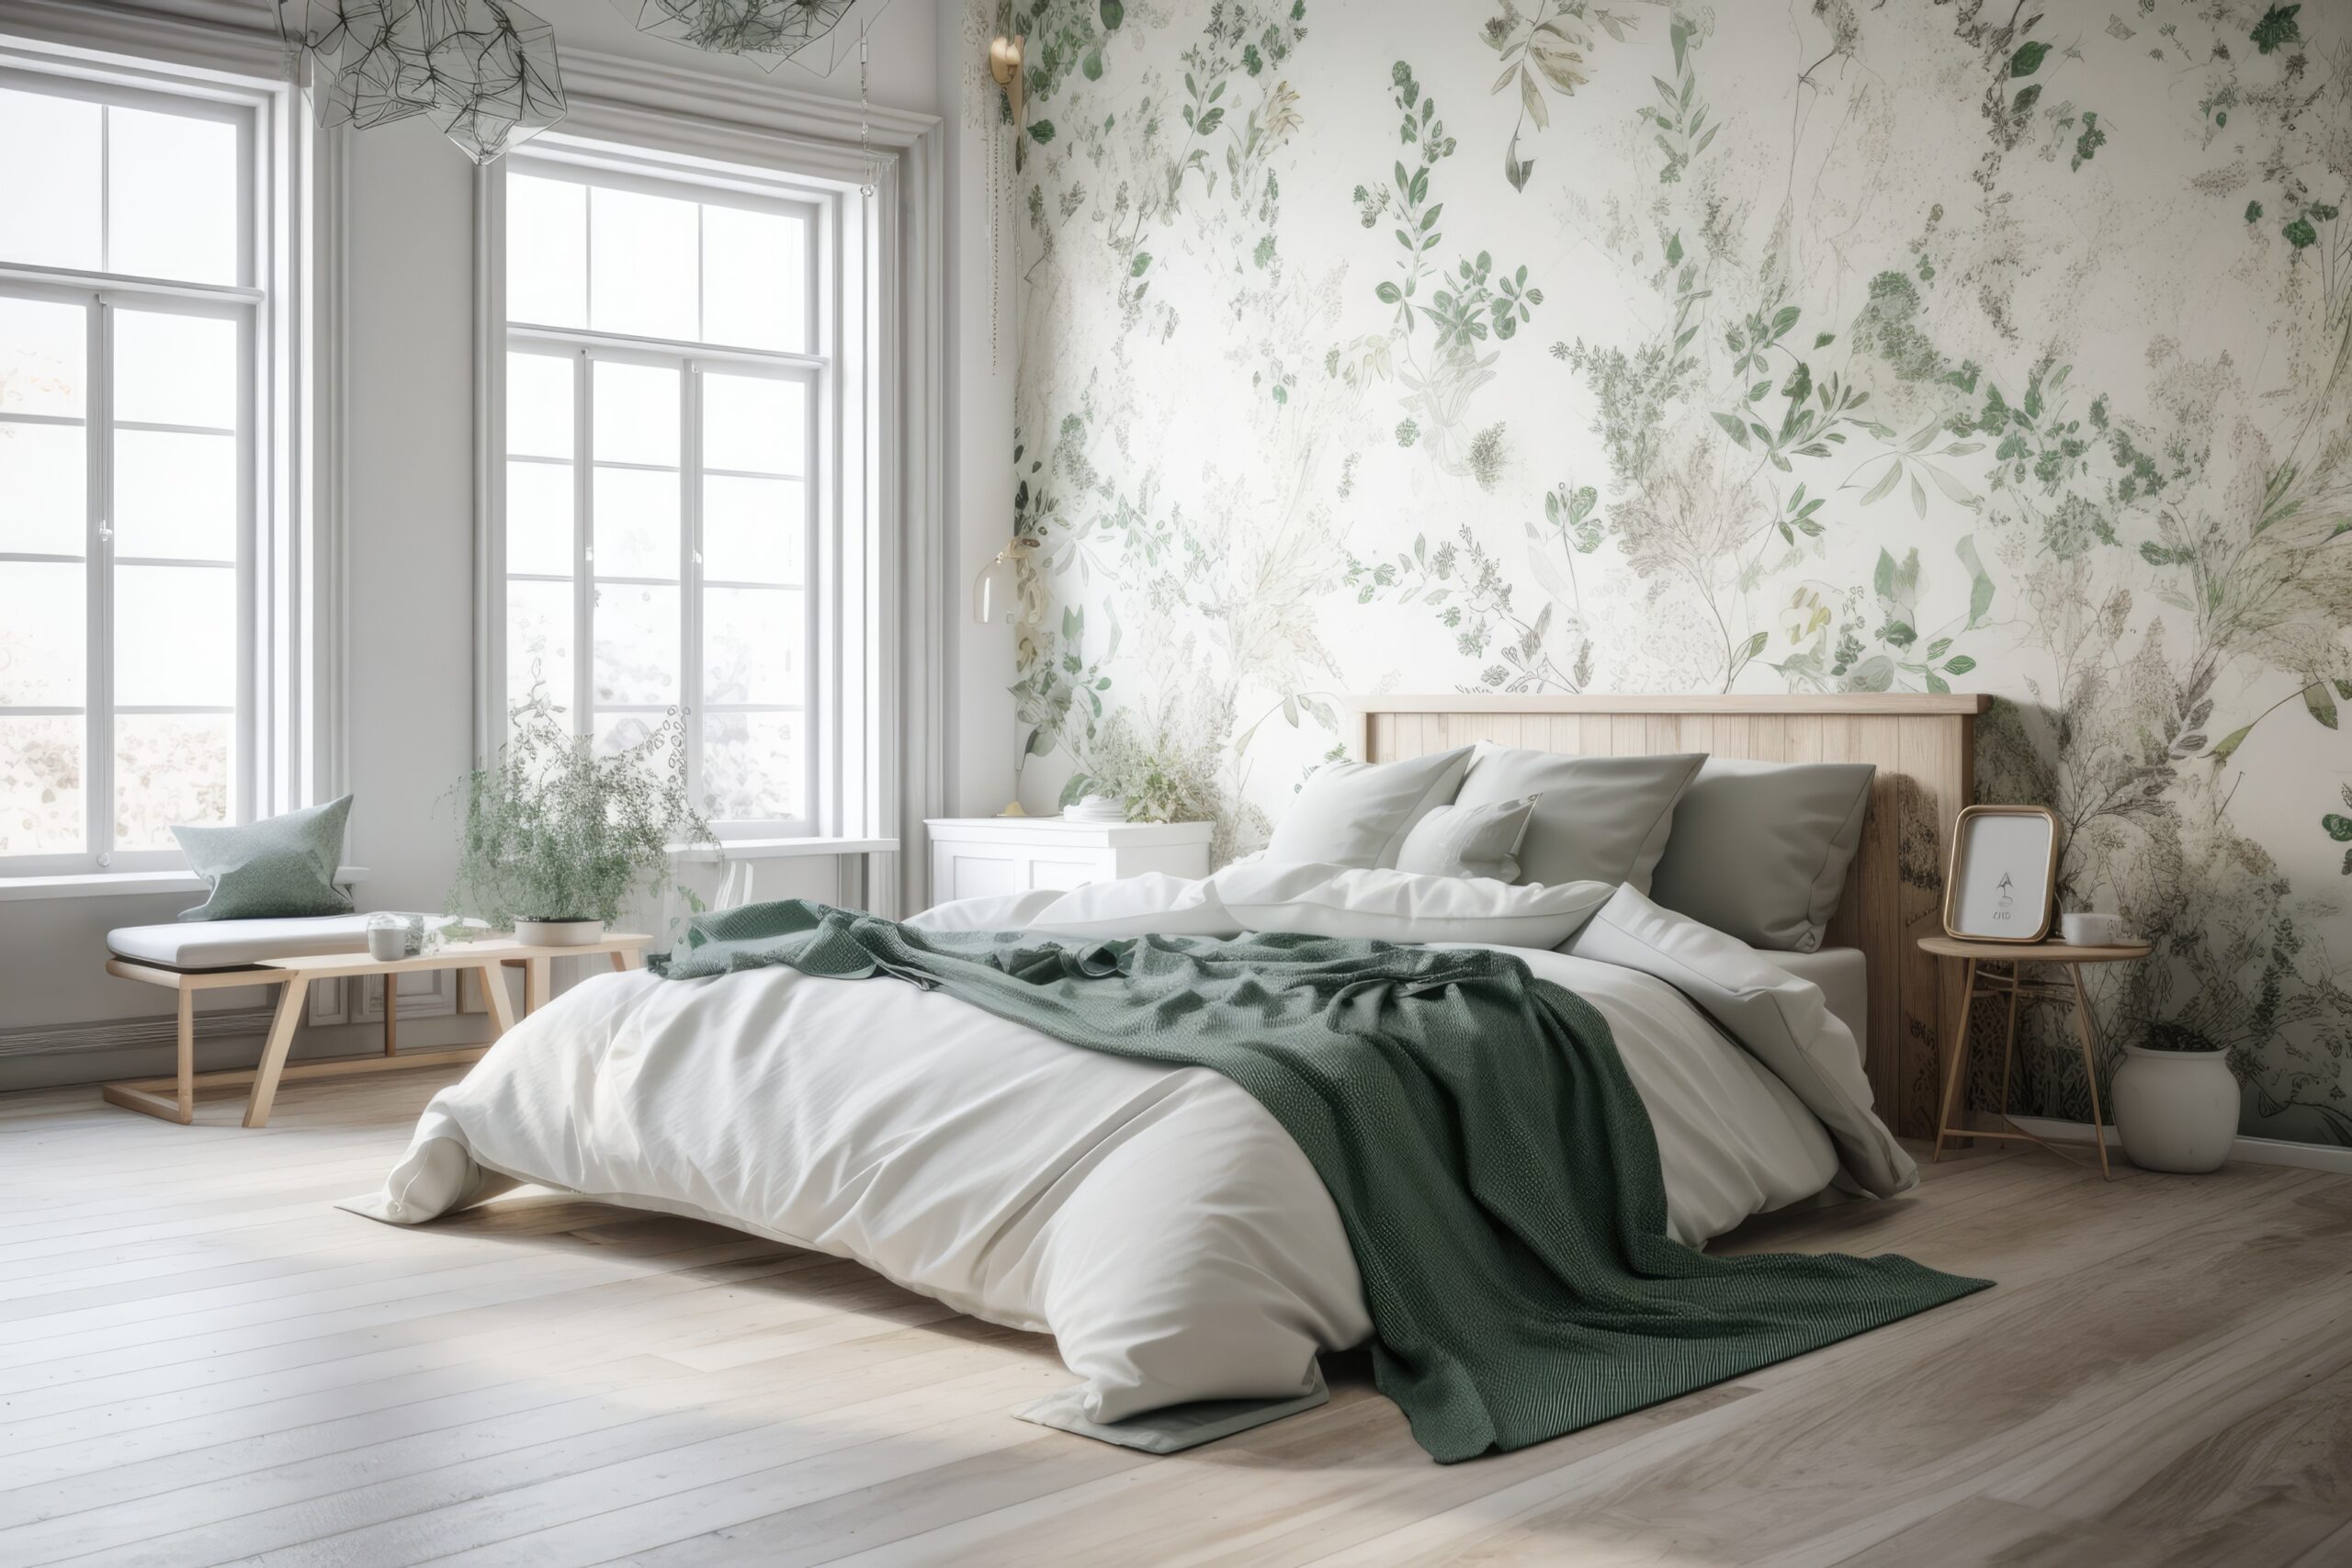 Master bedroom with large windows and green and white floral wallpaper